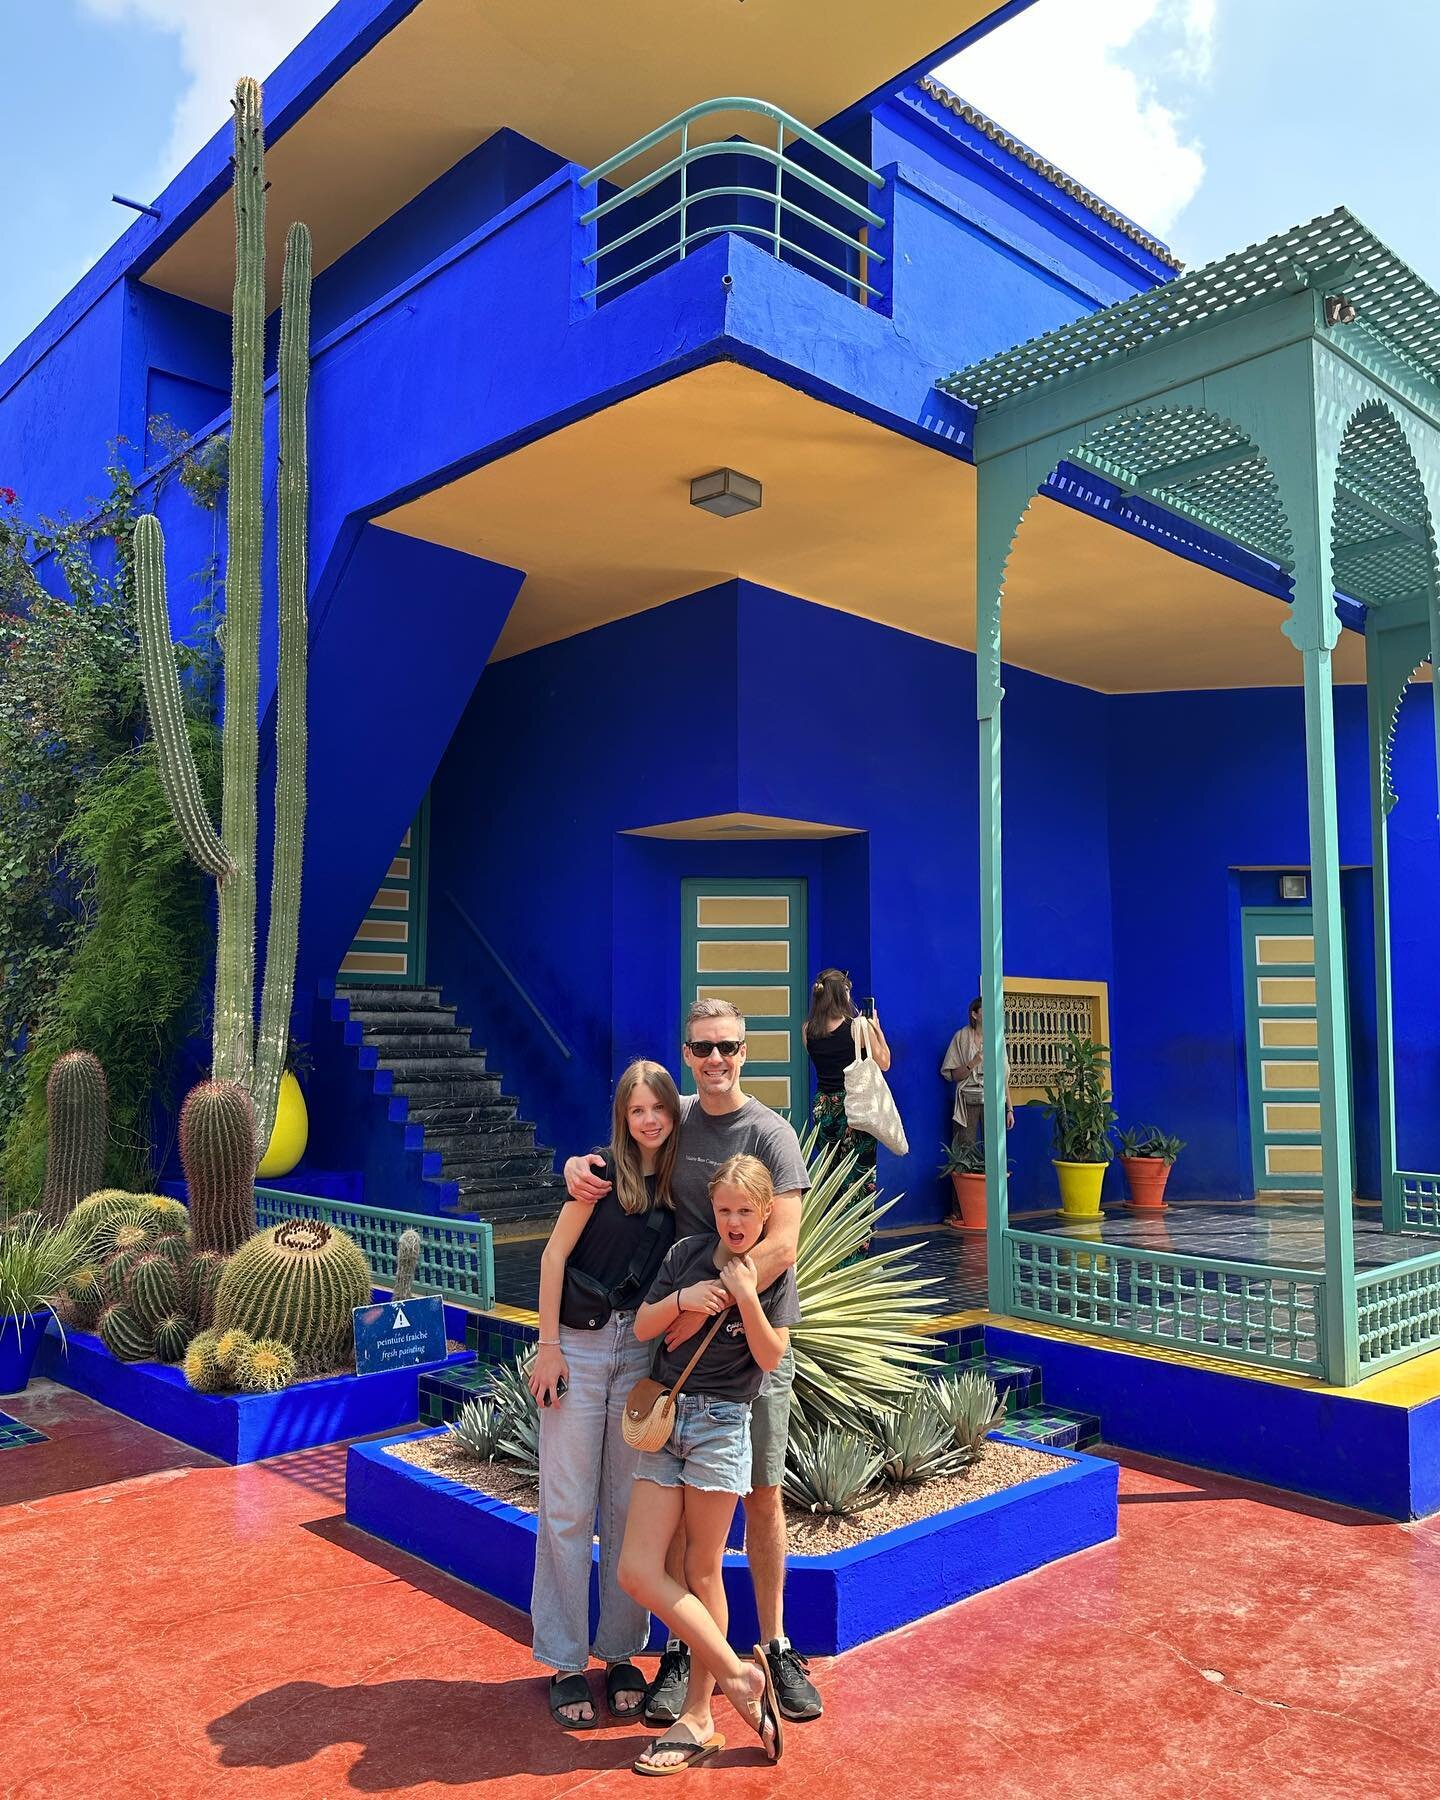 JARDIN MAJORELLE🌵

A botanical oasis in Marrakech, Jardin Majorelle was created by French Orientalist Jacques Majorelle starting in 1923 and features a Cubist villa designed by French architect Paul Sinoir built in the 1930s. The complex was purchas